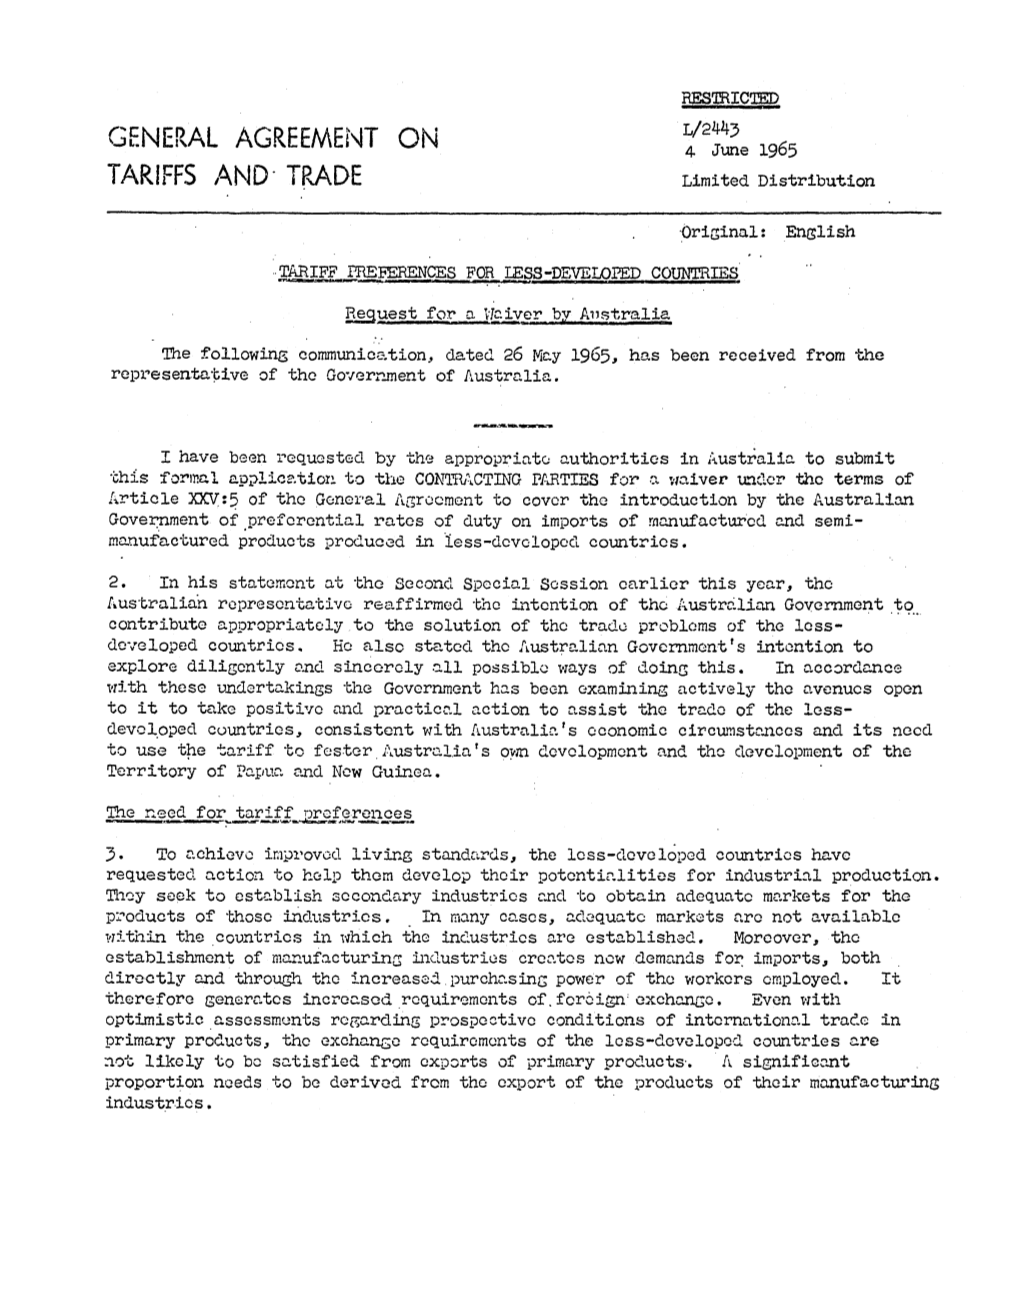 GENERAL AGREEMENT on 4 June 1965 TARIFFS and TRADE Limited Distribution